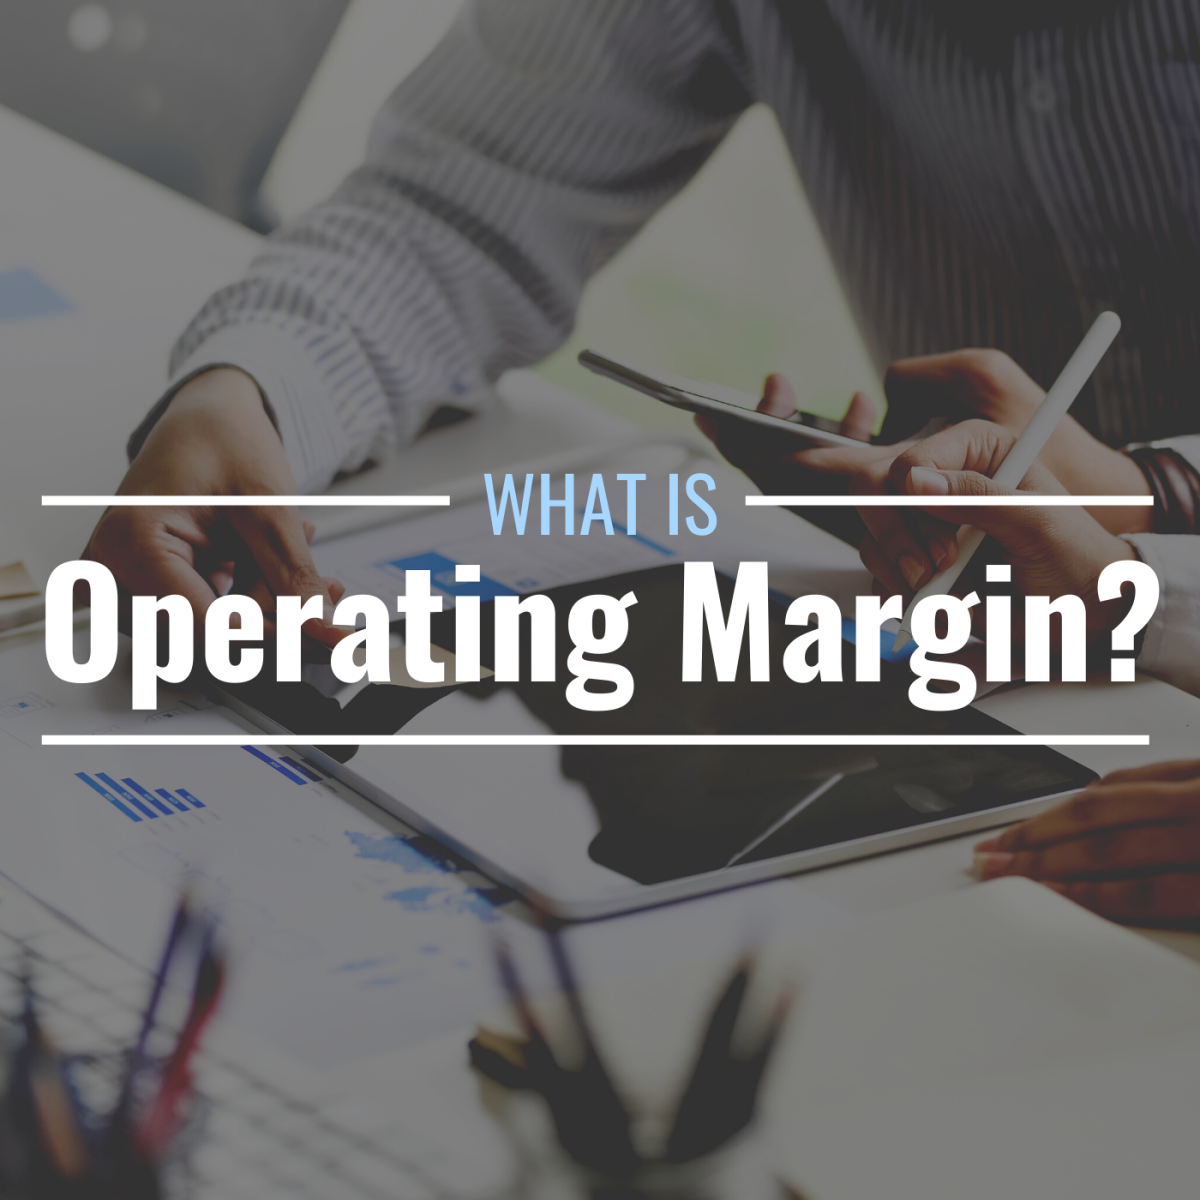 Photo of a people working on financial data with text overlay that reads "What Is Operating Margin?"